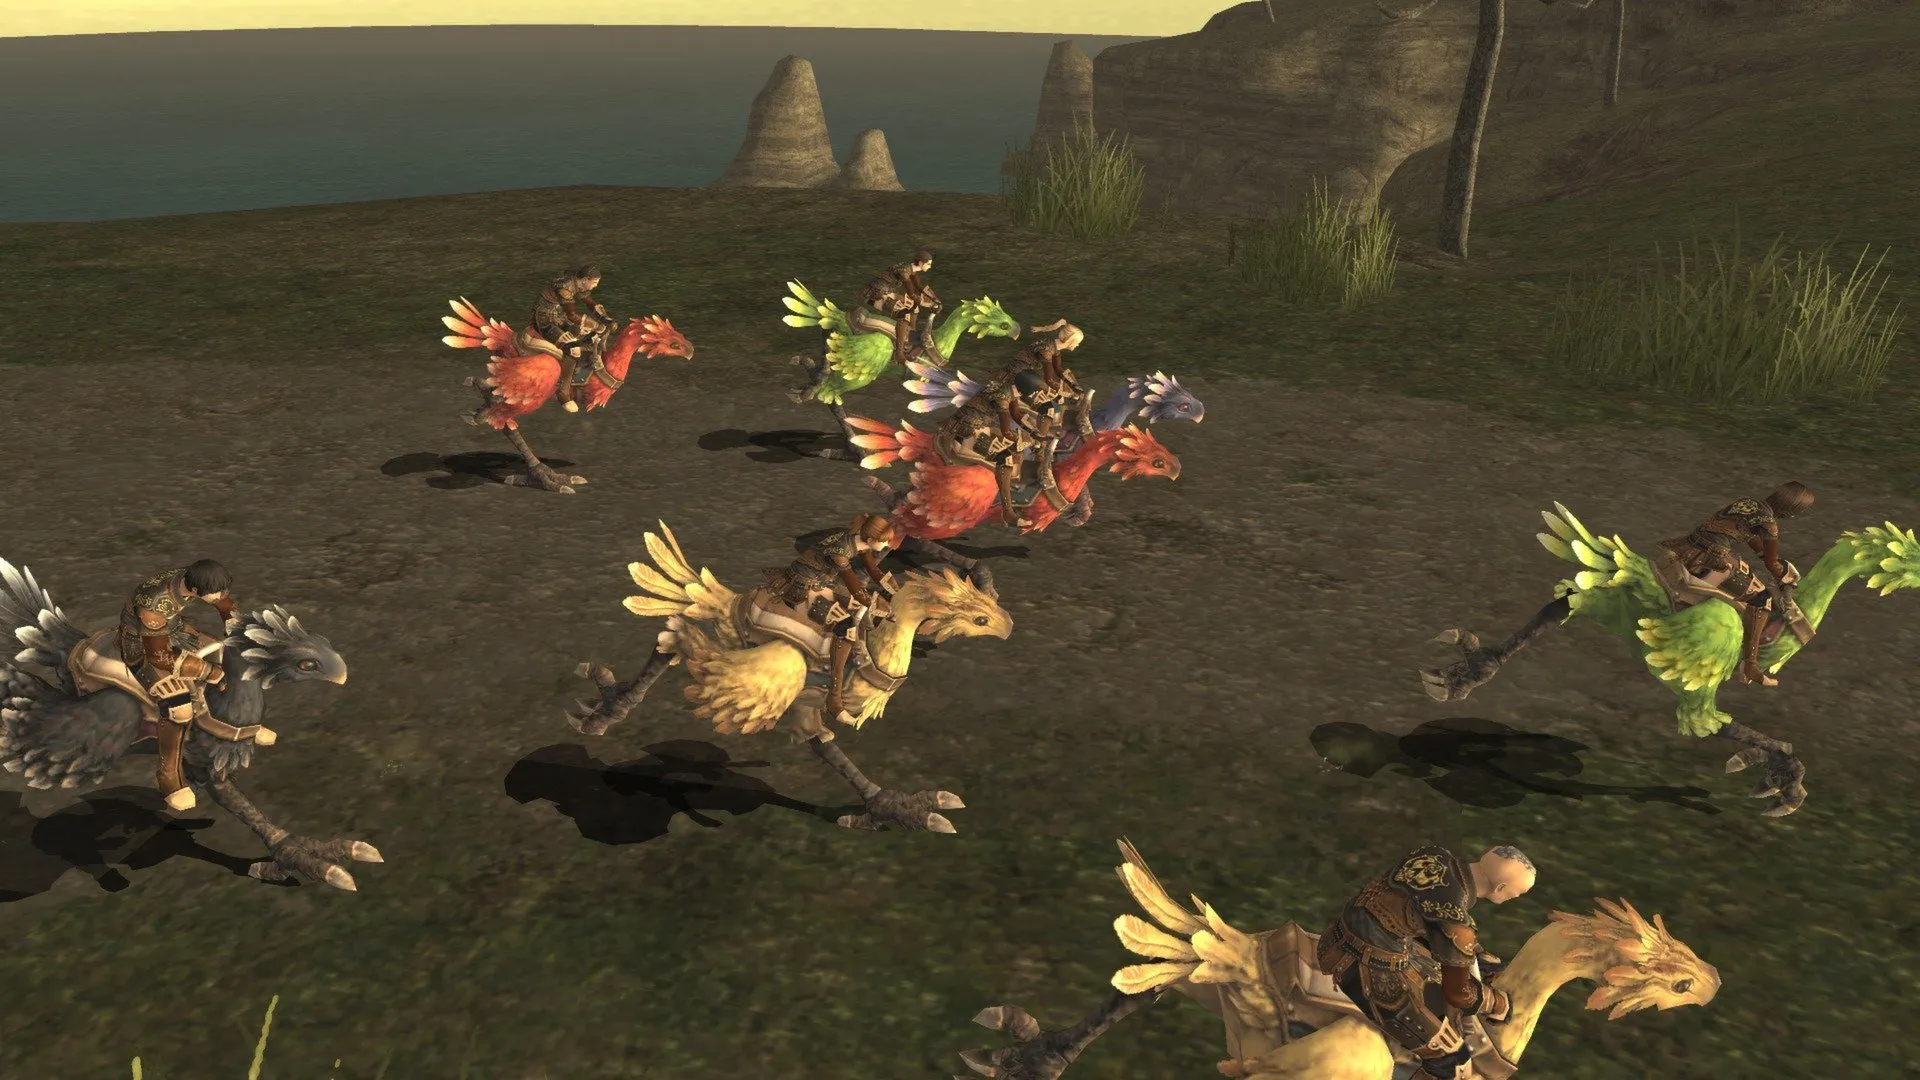 Final Fantasy XI offers not one but two version updates for the month of  May